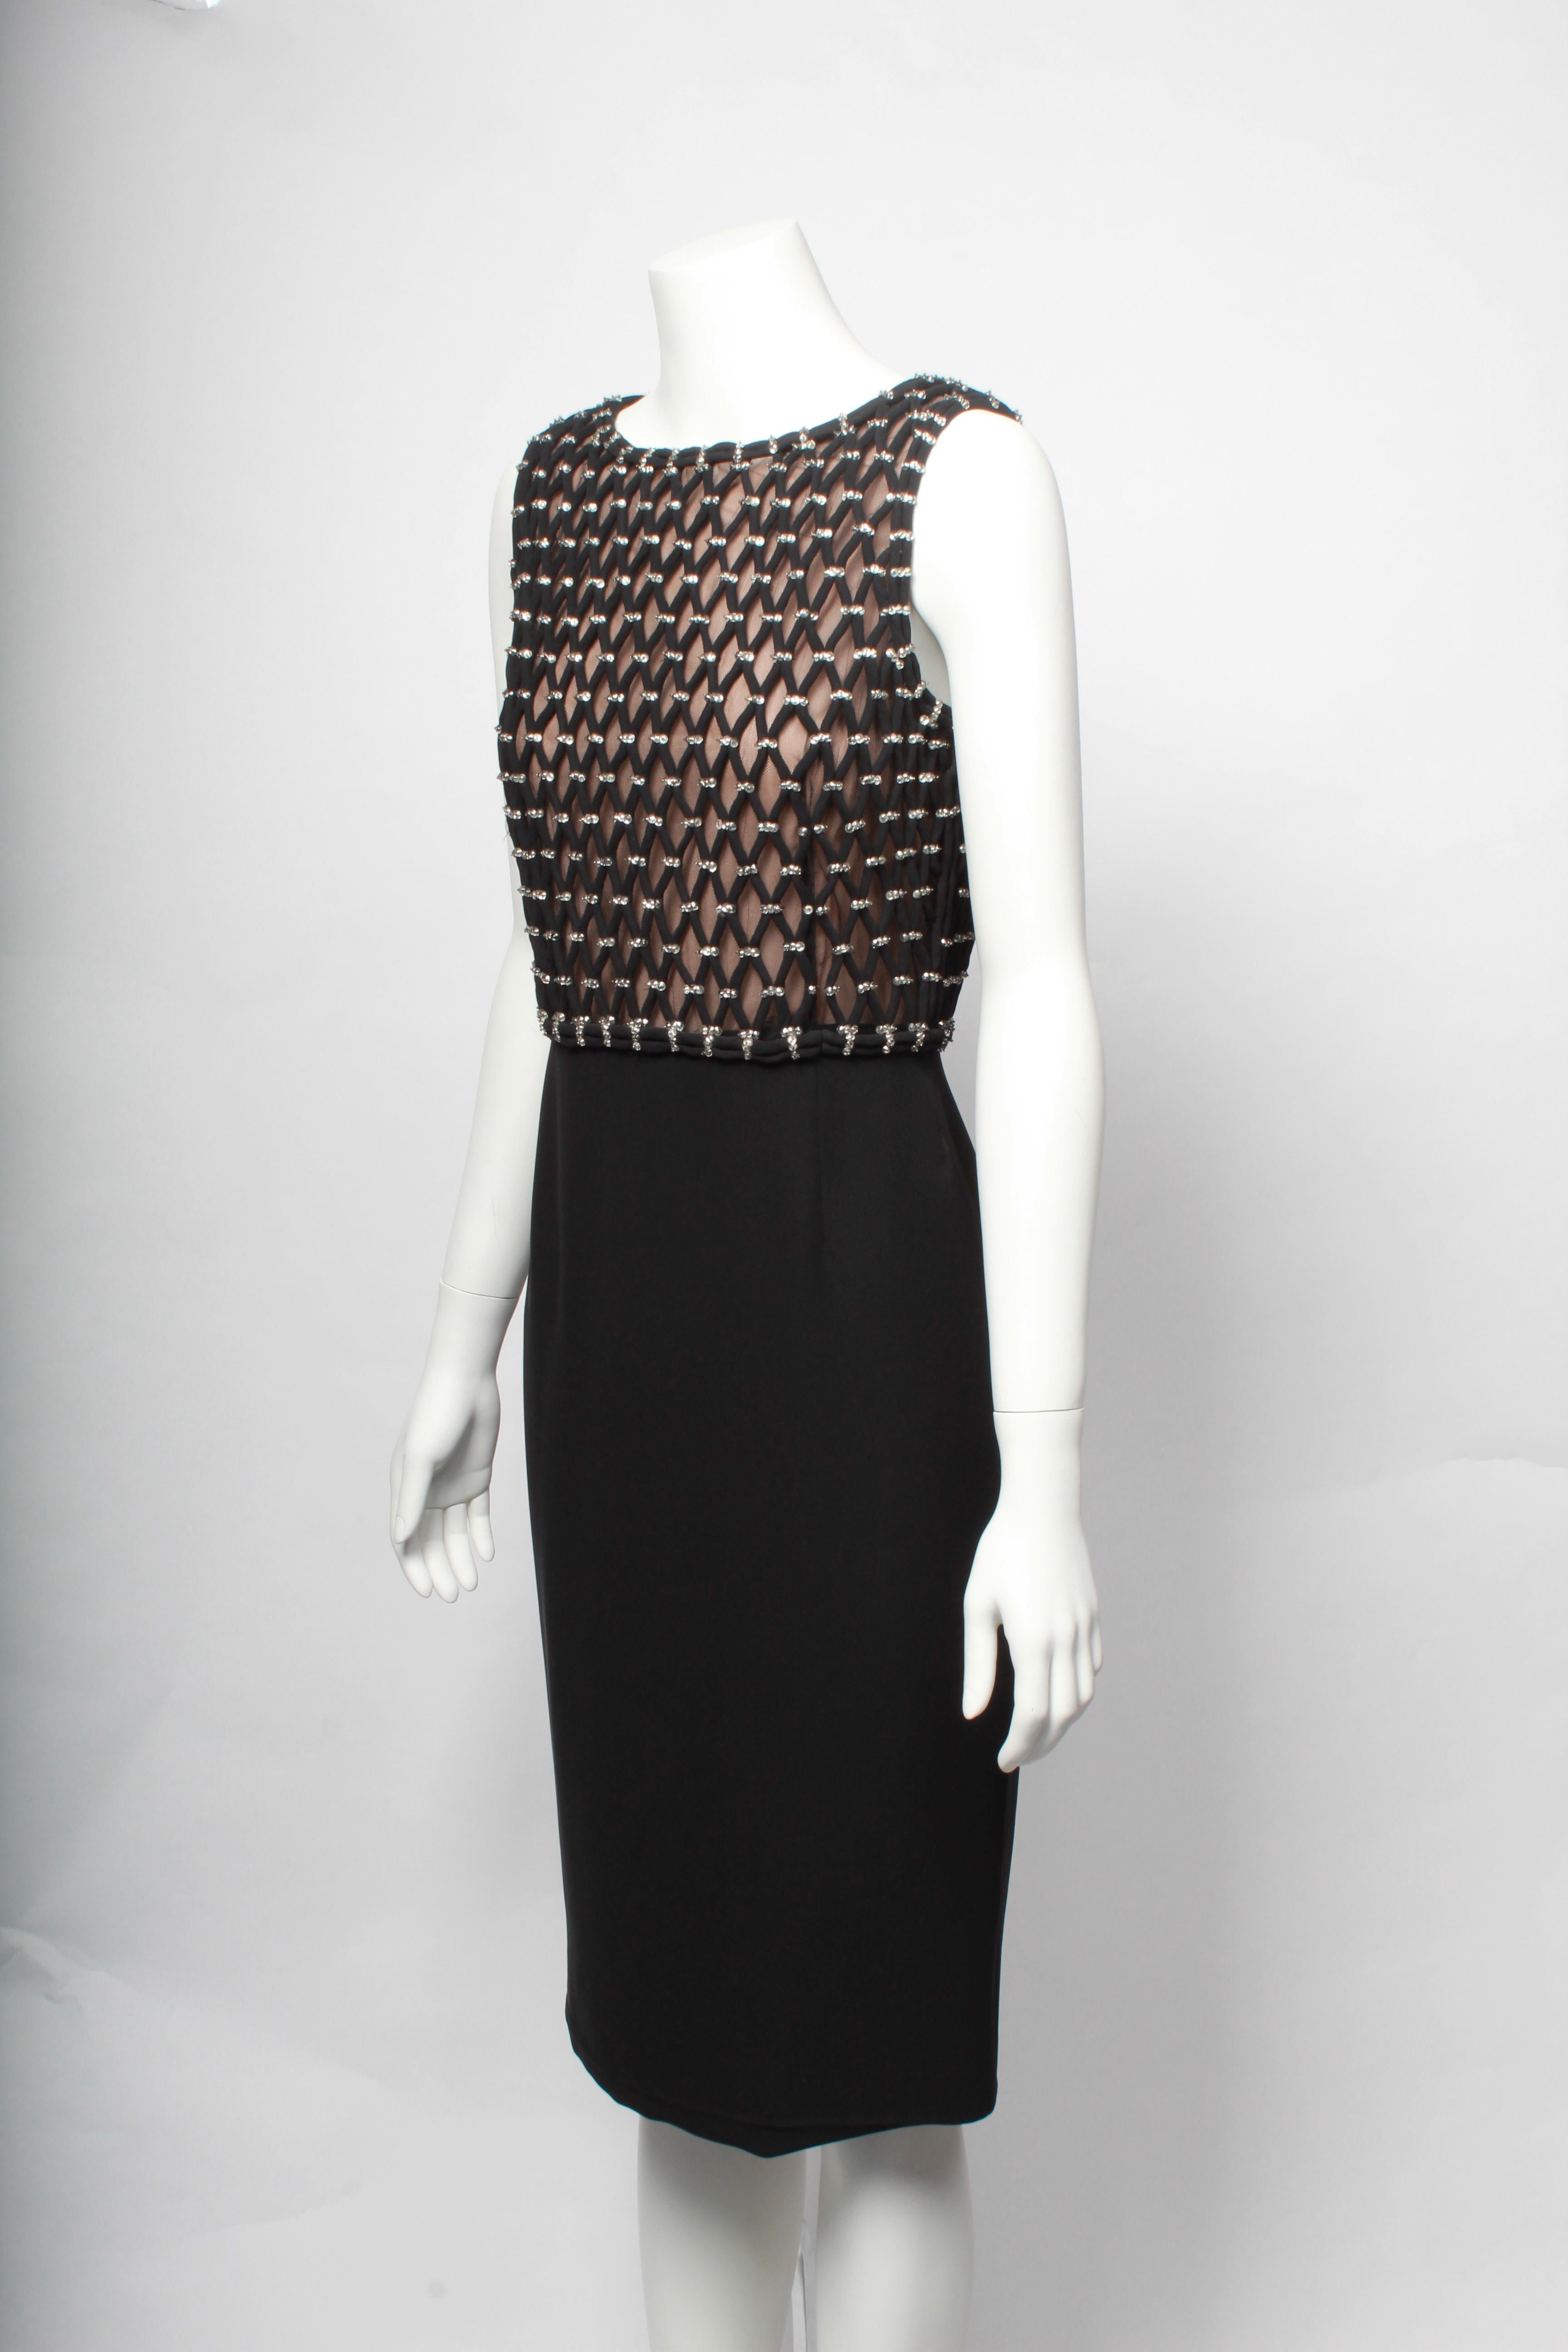 Valentino Spa Cocktail Dress with beaded diamond webbing detailing on the torso and flattering tulip skirt.